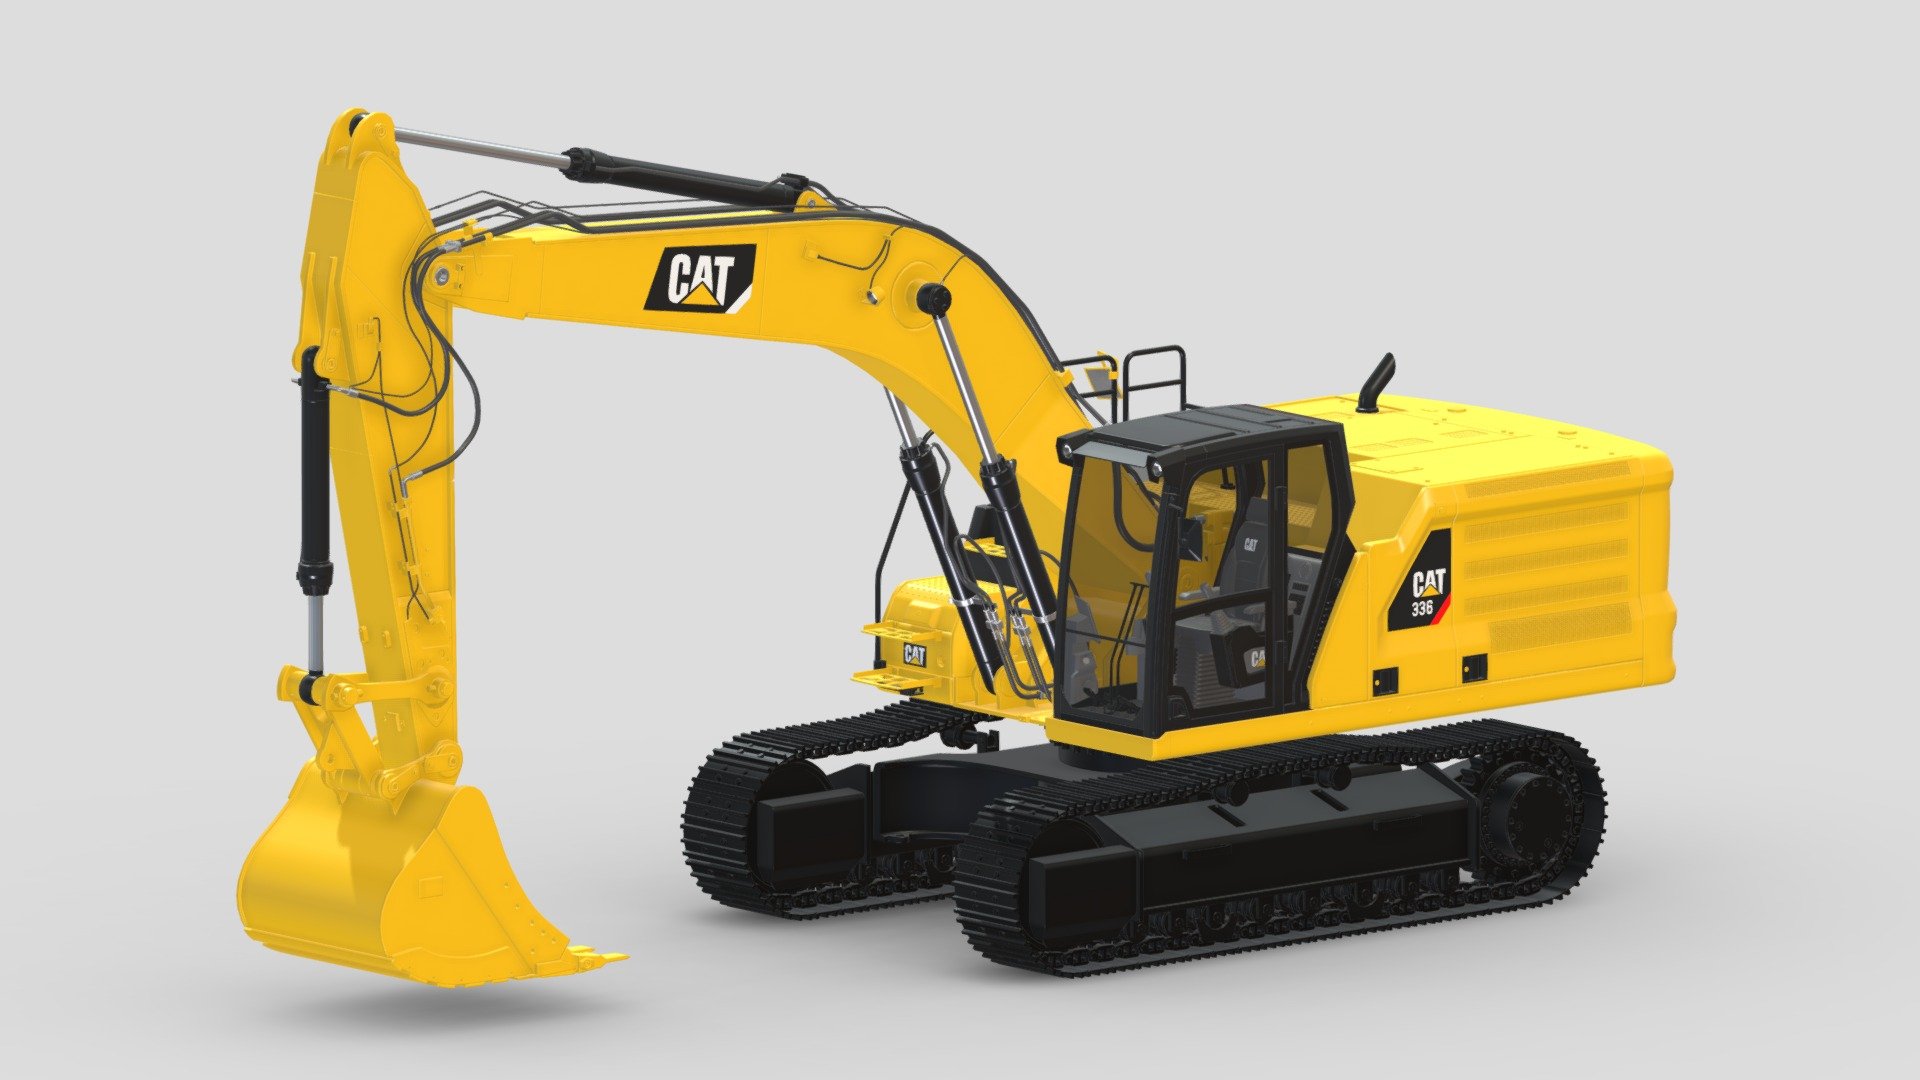 Hi, I'm Frezzy. I am leader of Cgivn studio. We are a team of talented artists working together since 2013.
If you want hire me to do 3d model please touch me at:cgivn.studio Thanks you! - Cat 336 Excavator - 3D model by Frezzy3D 3d model